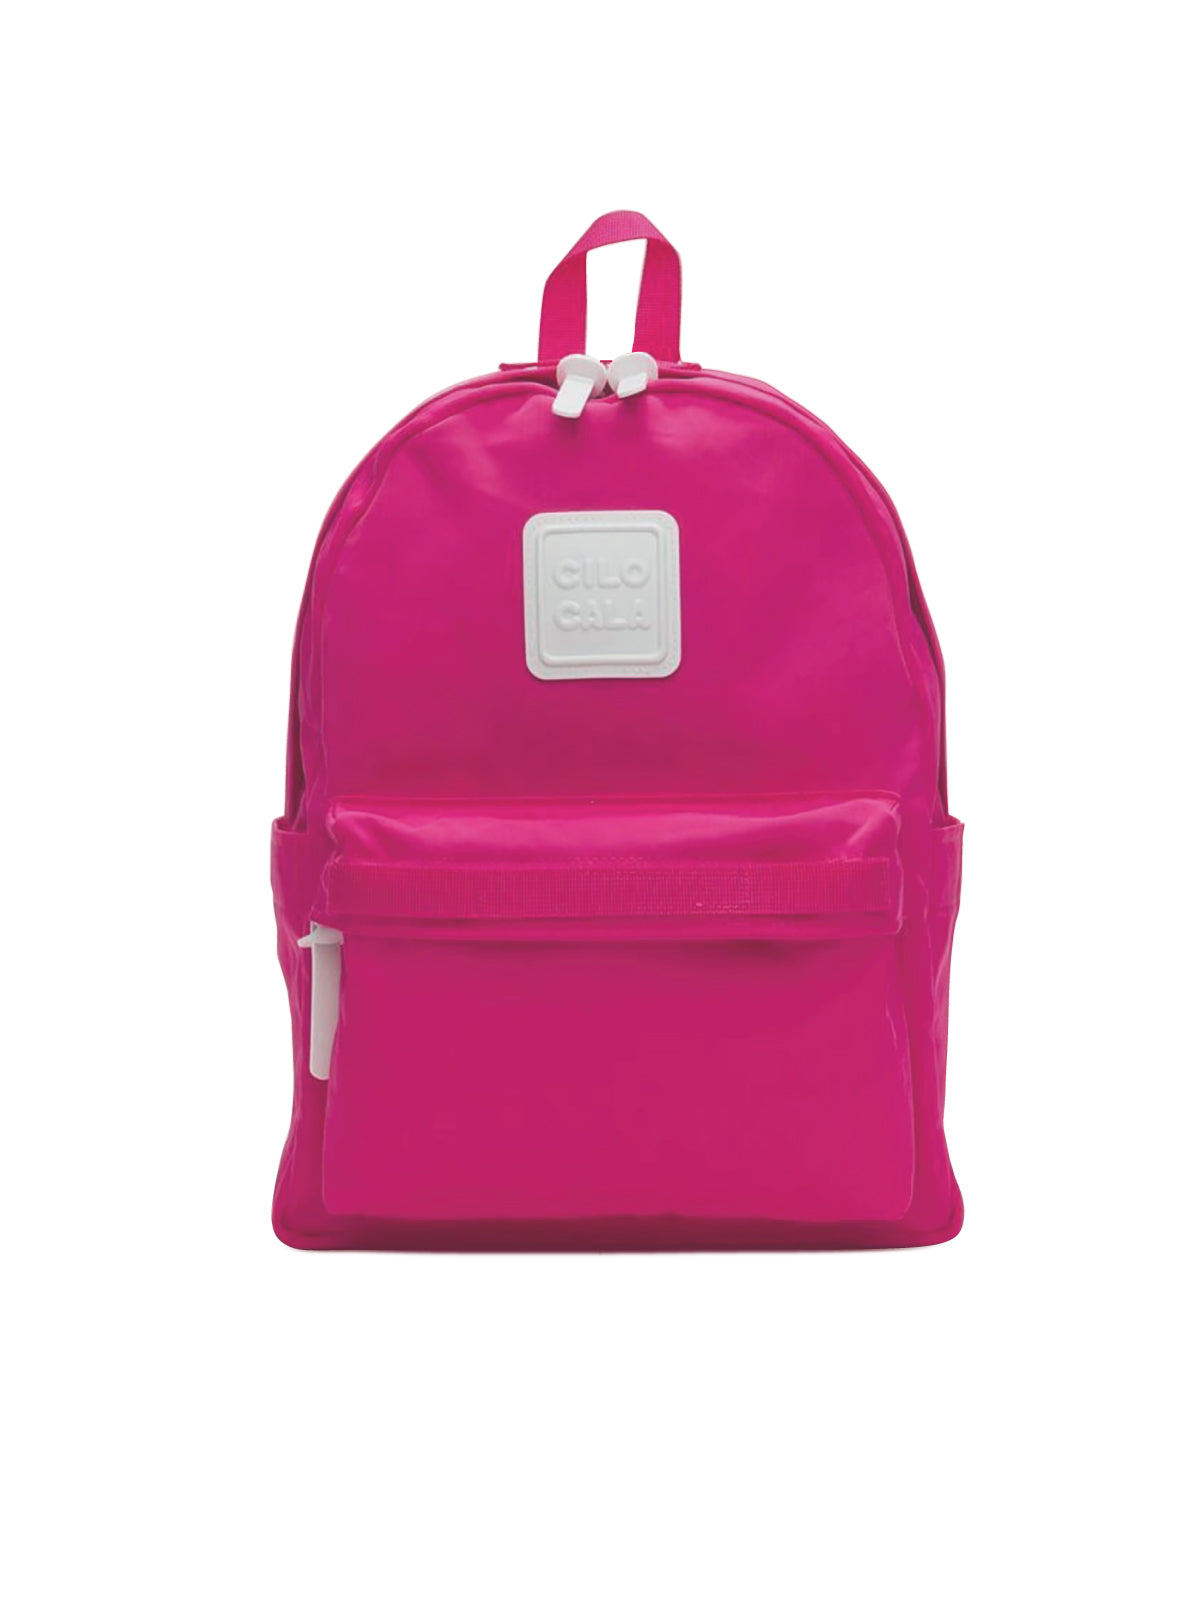 BACKPACK M+ SIZE